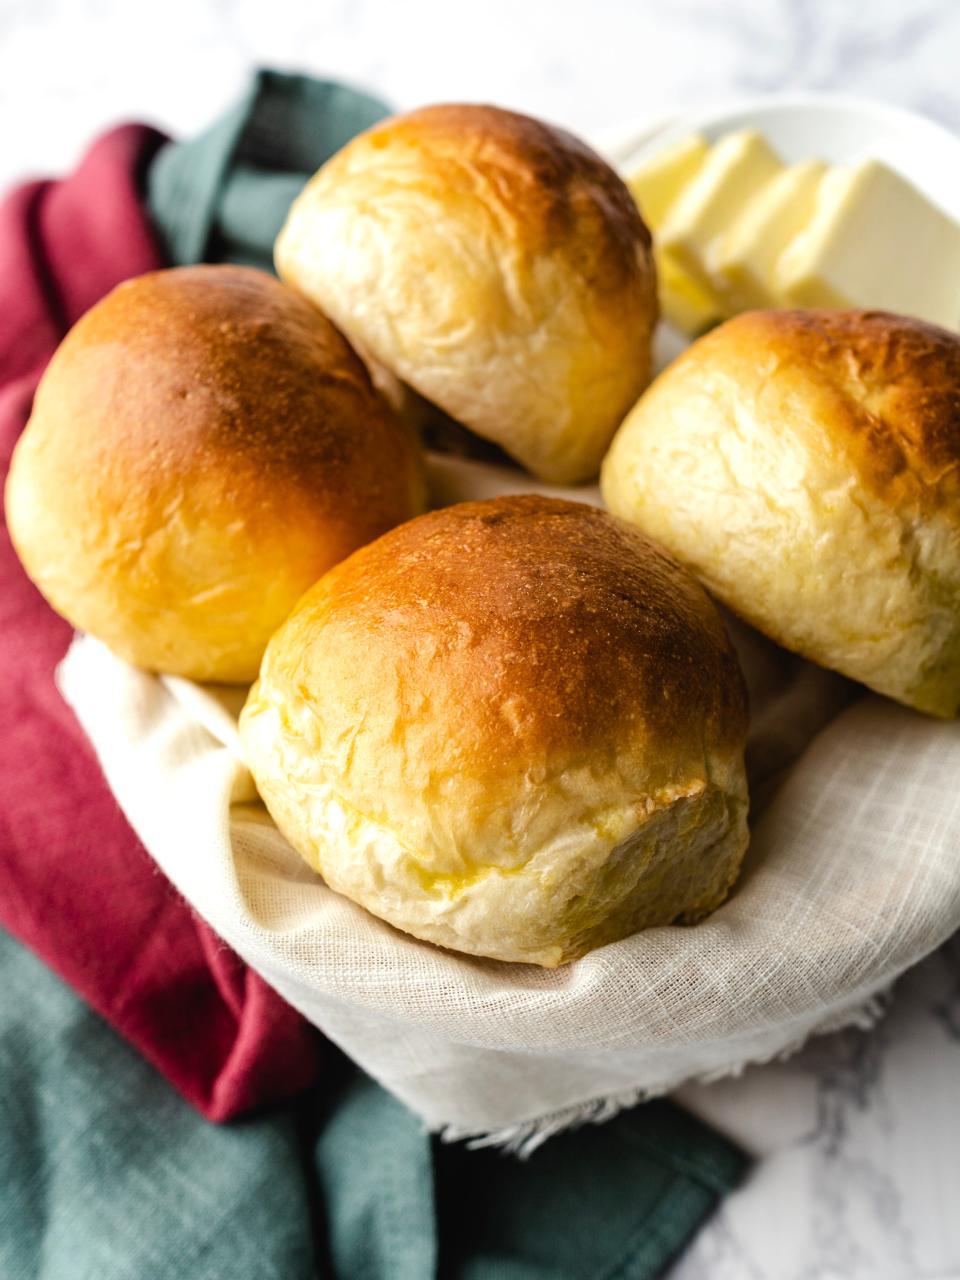 The secret to attaining the airy texture of these brown and serve rolls lies in the Tangzhong method, an age-old Asian technique.